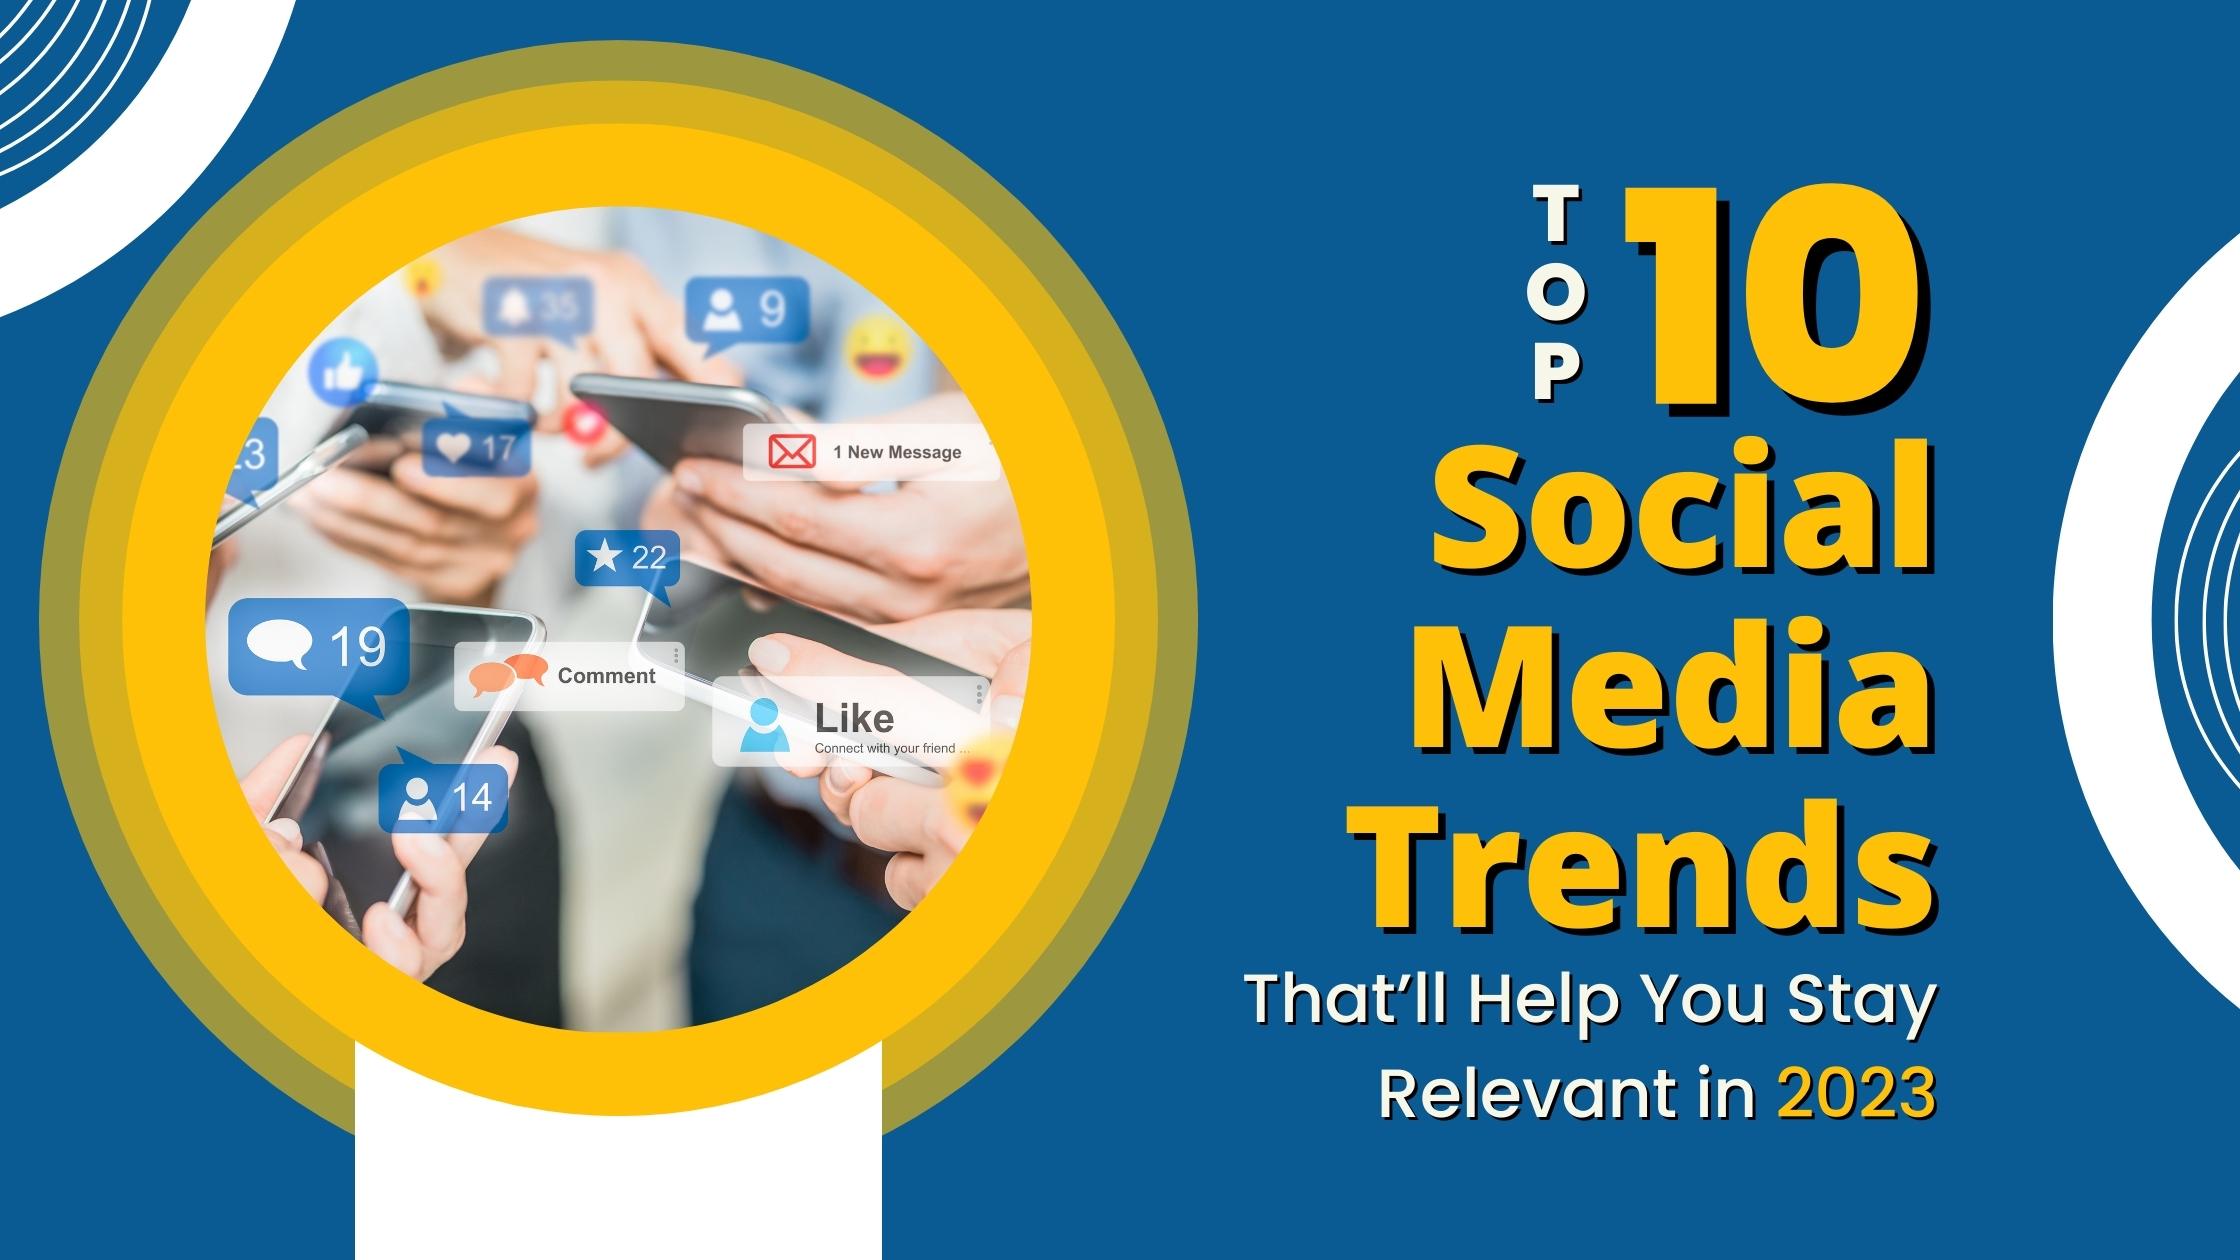 research topic about trends in social media